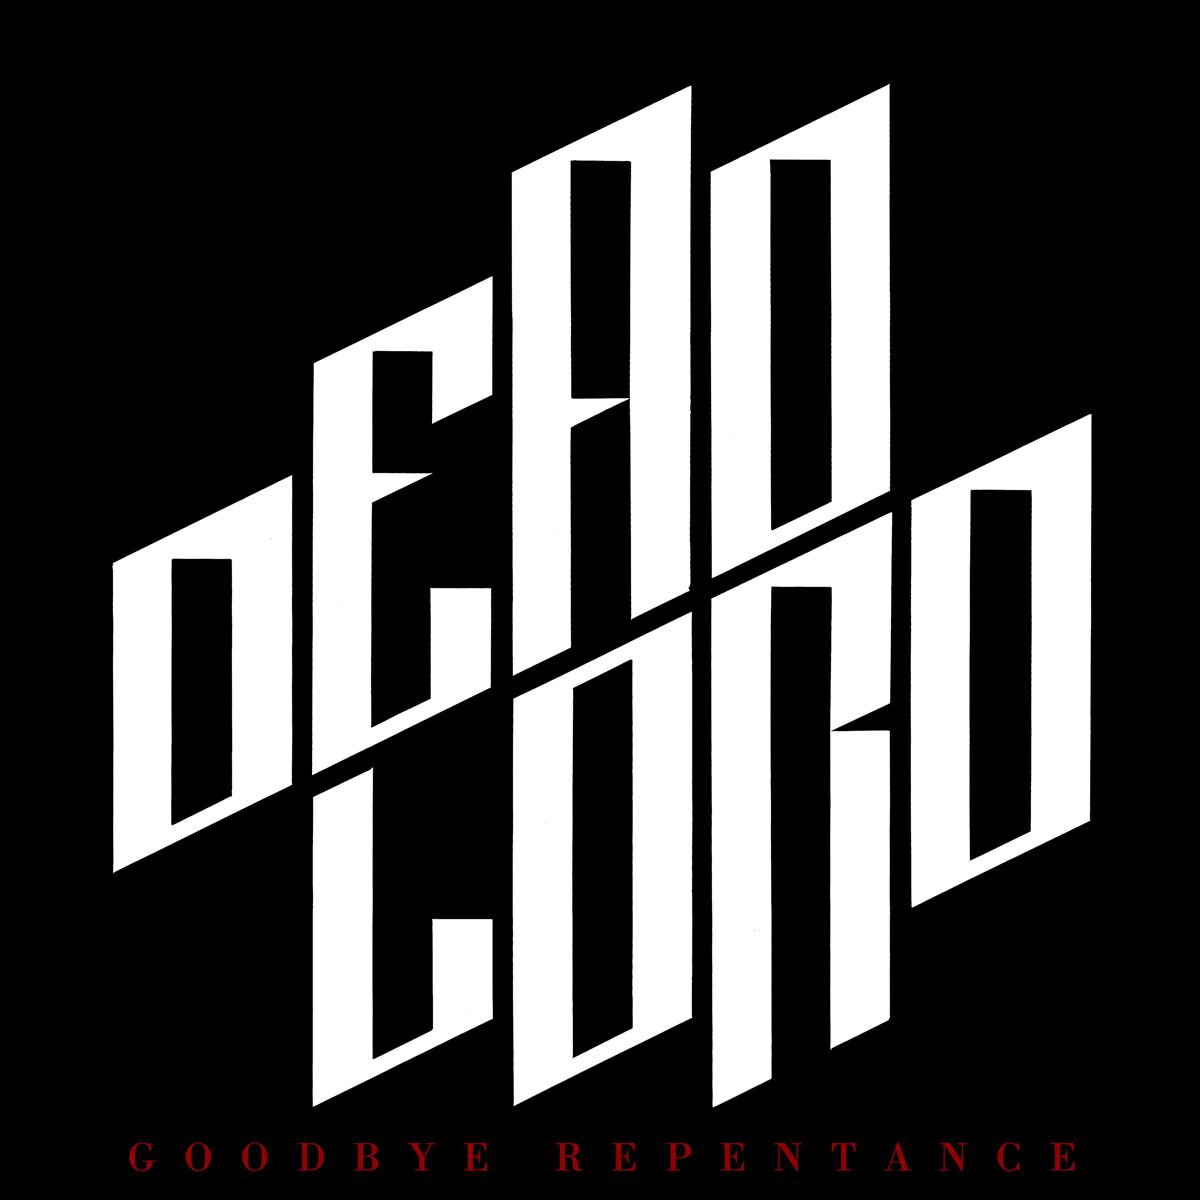 Dead Lord Goodbye repentance CD multicolor